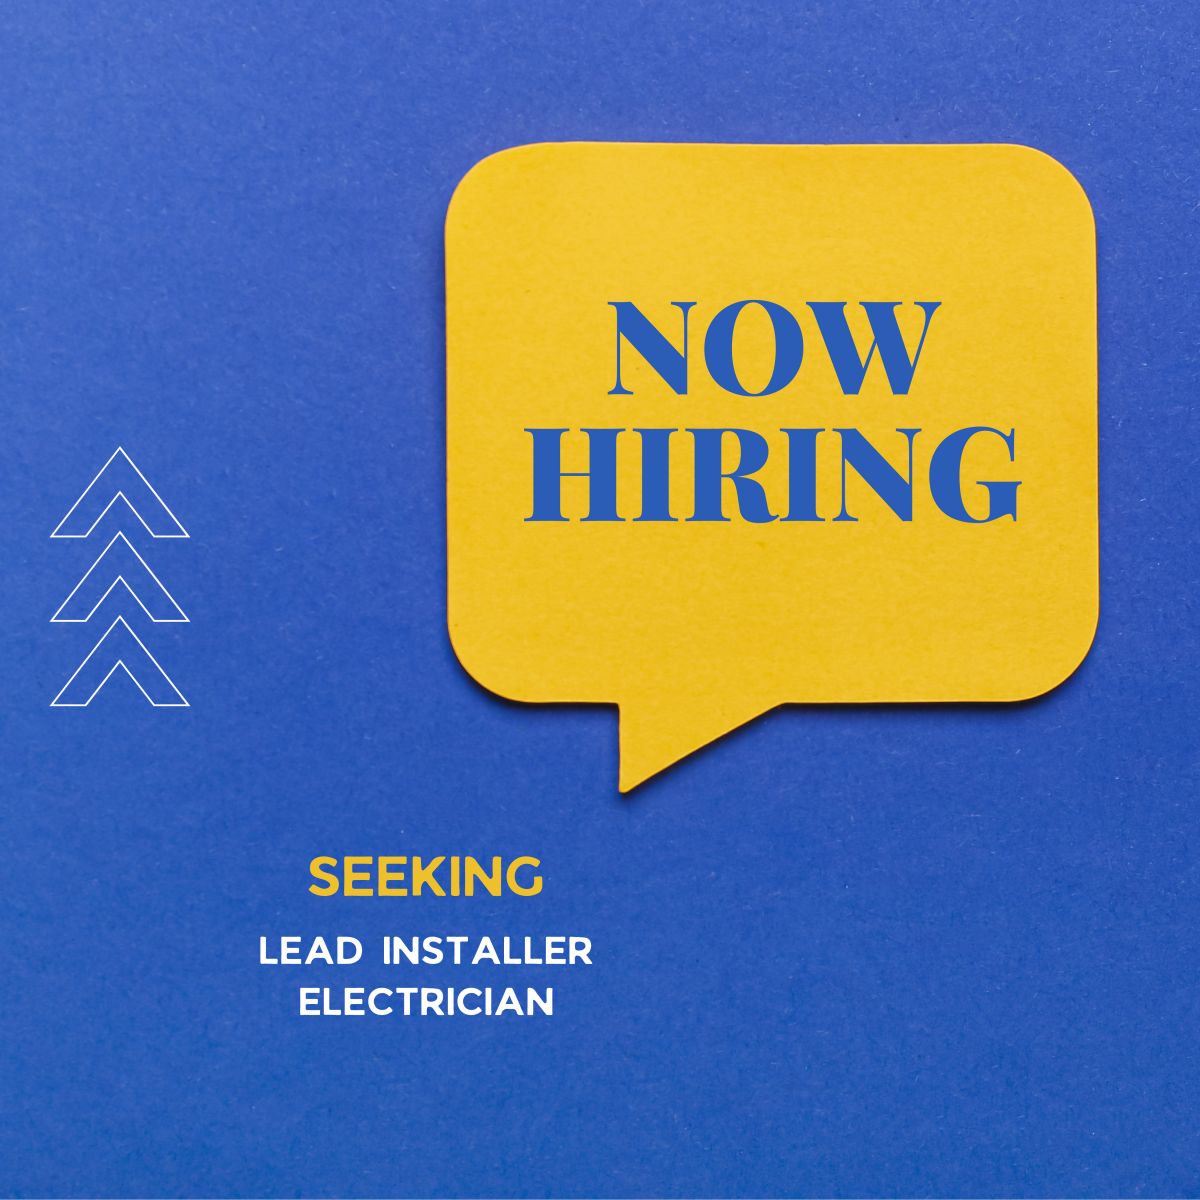 Valley Solar is now hiring